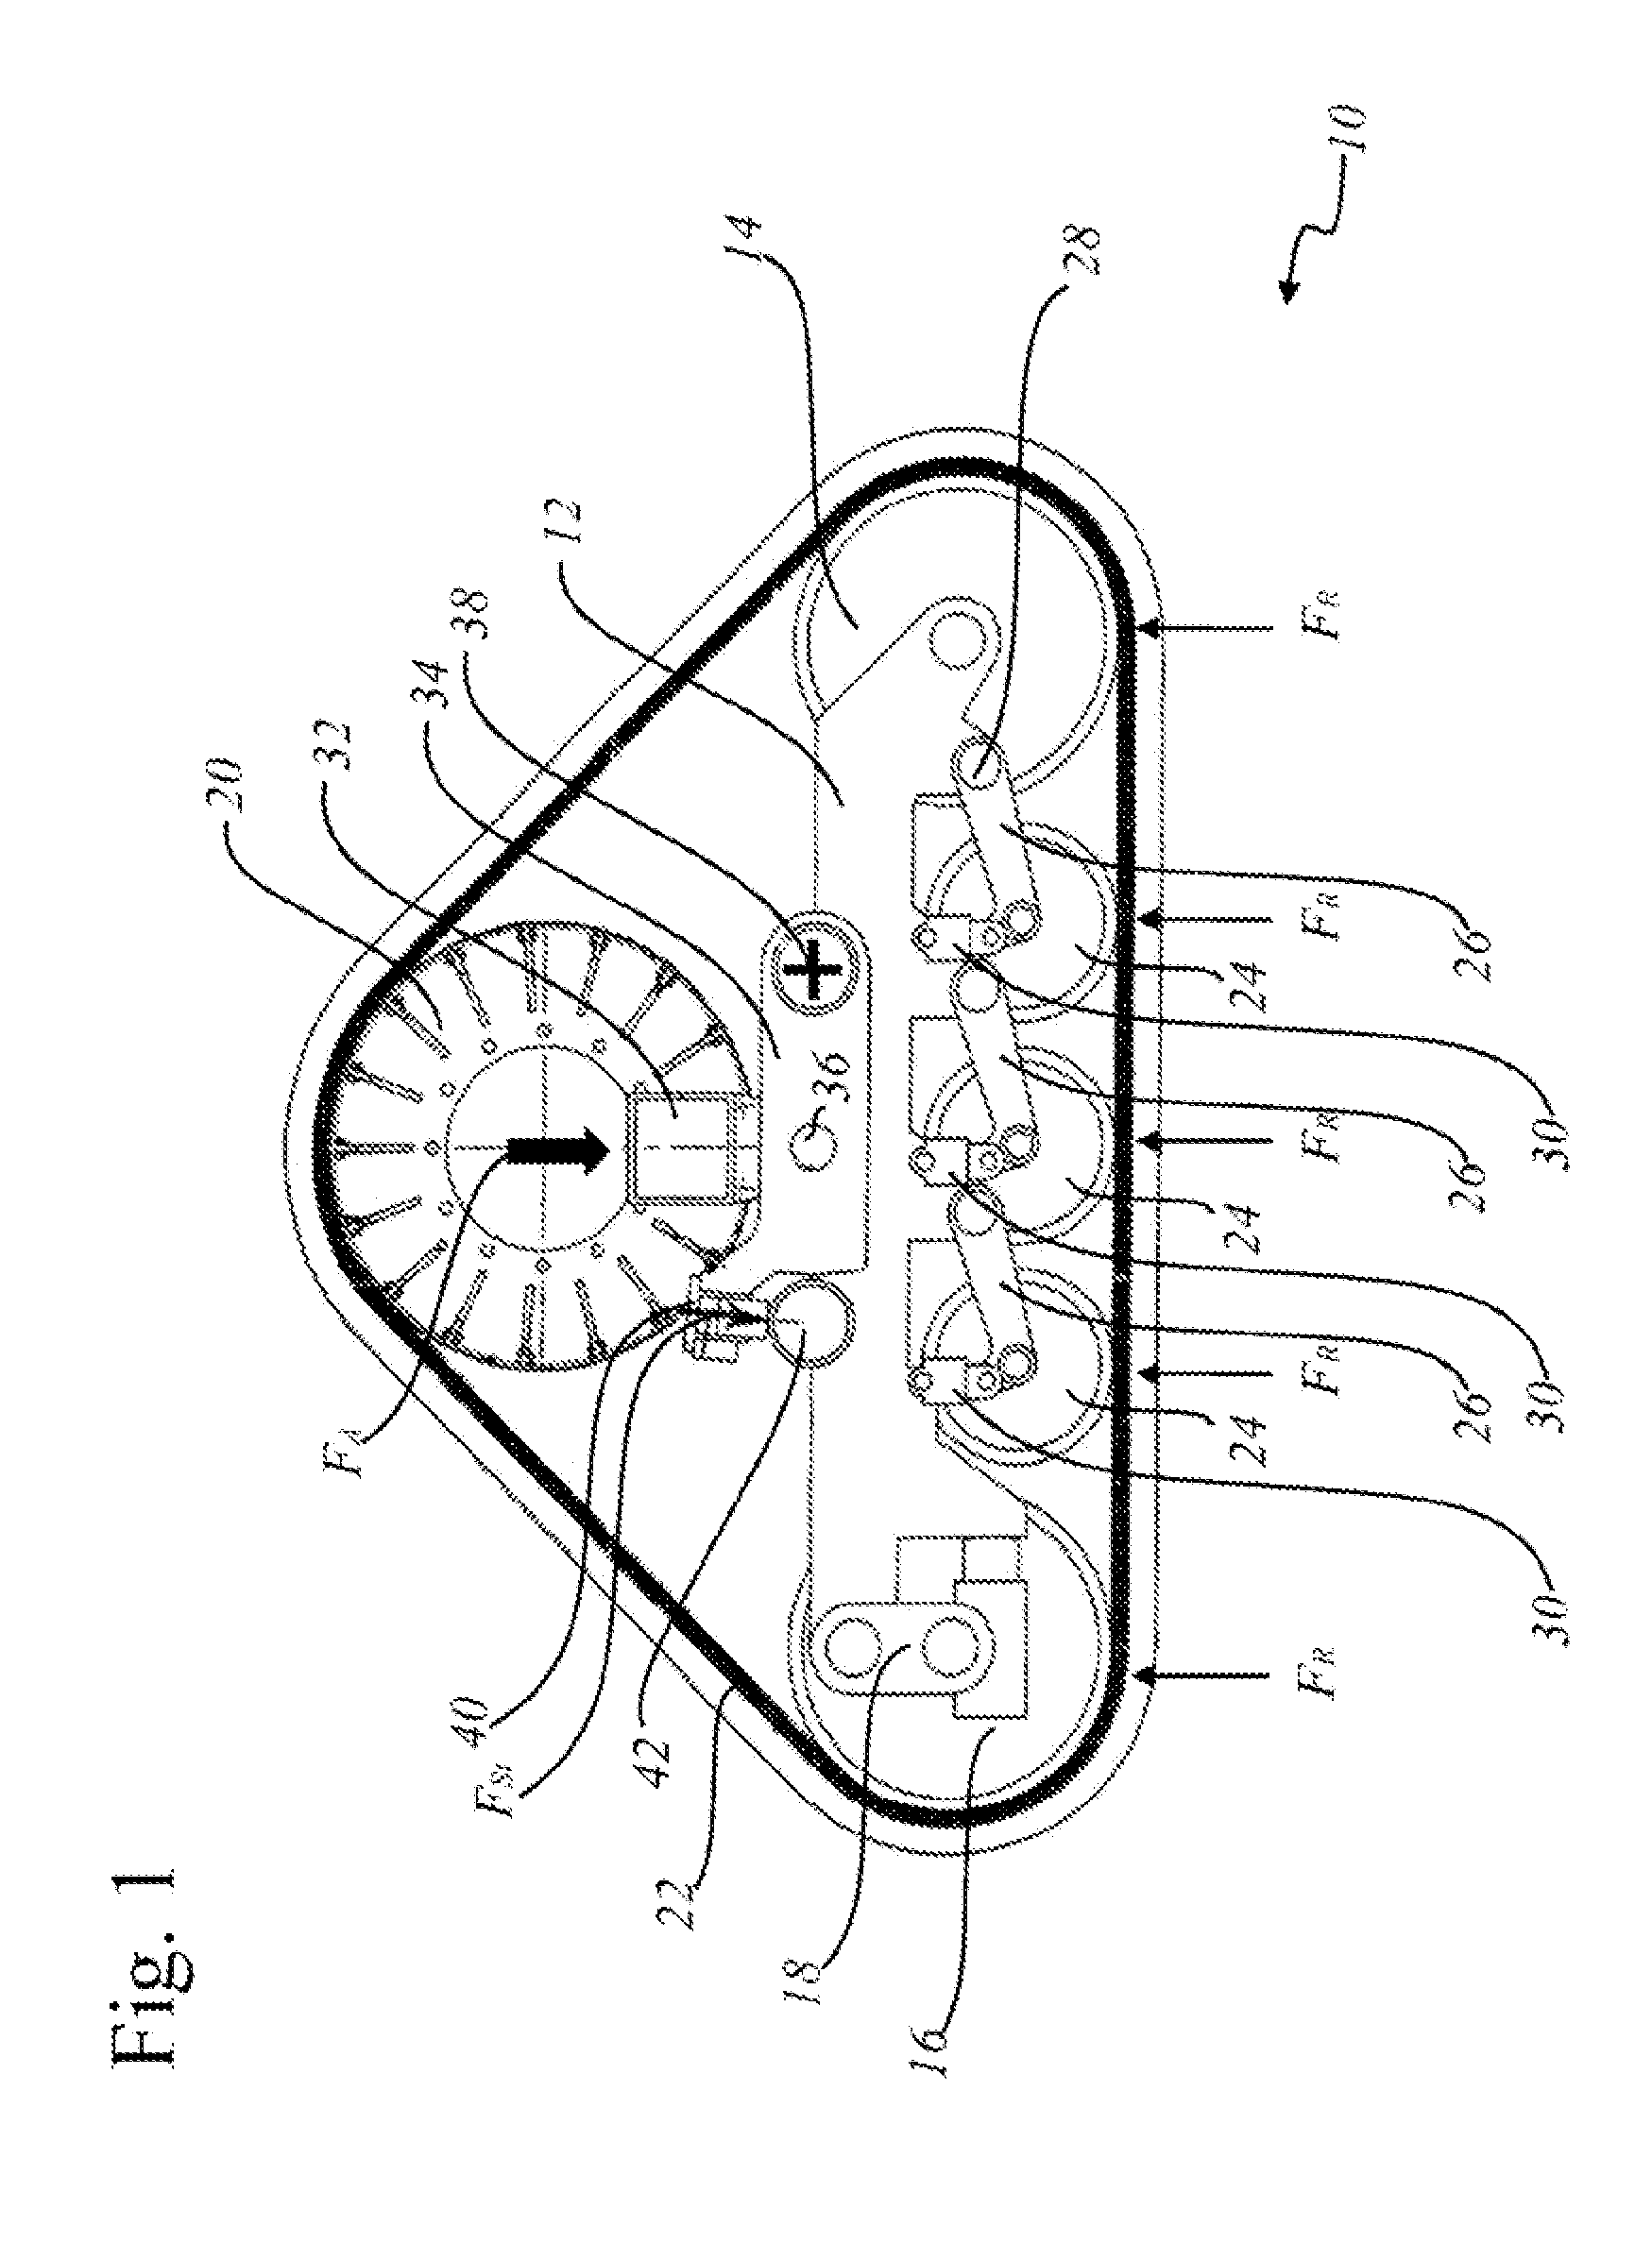 Traveling mechanism for agricultural machines and off-road vehicles having an endless belt-band traveling gear and a corresponding belt-band traveling gear